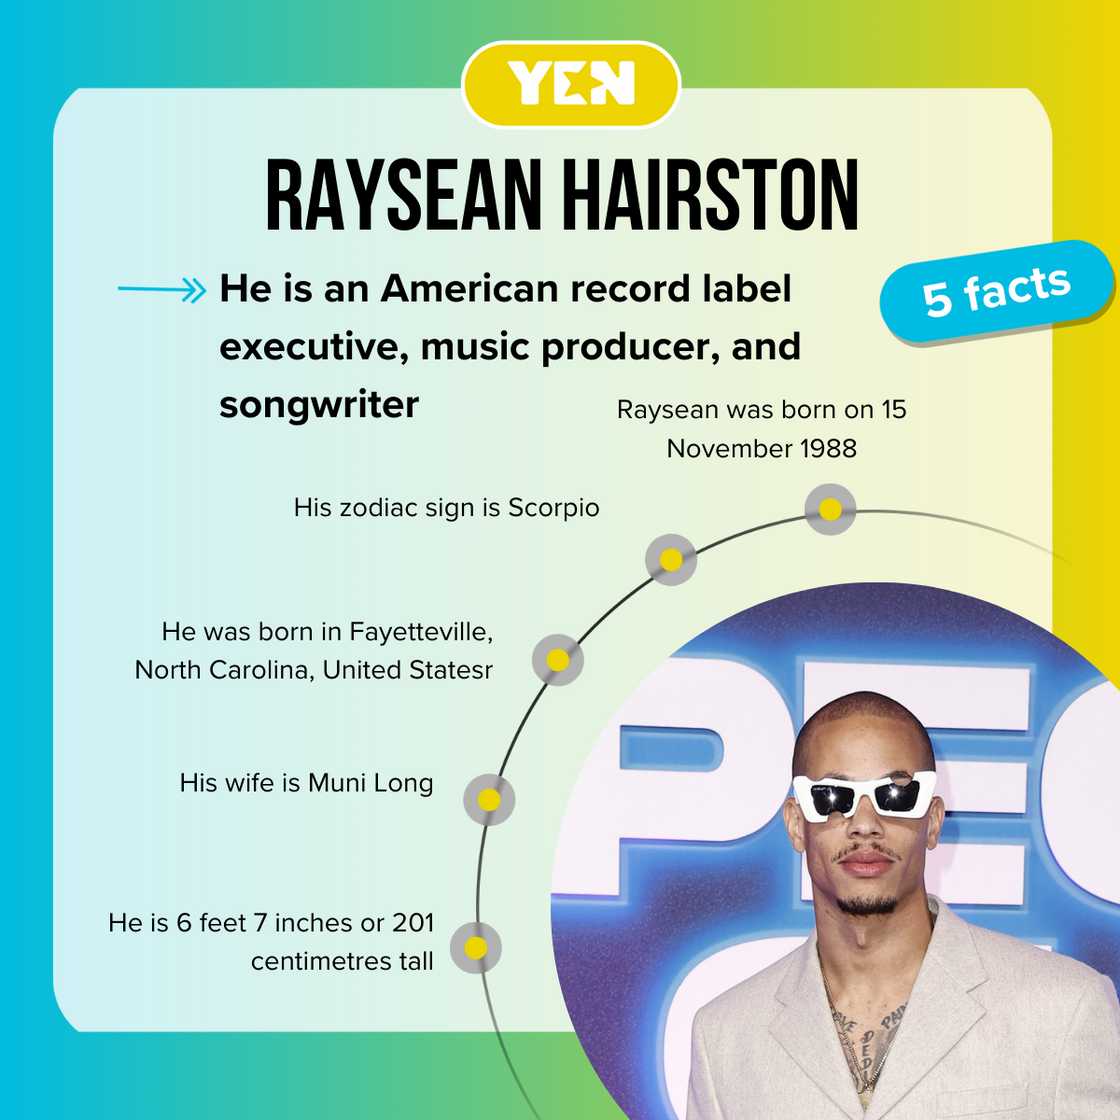 Top-5 facts about Raysean Hairston